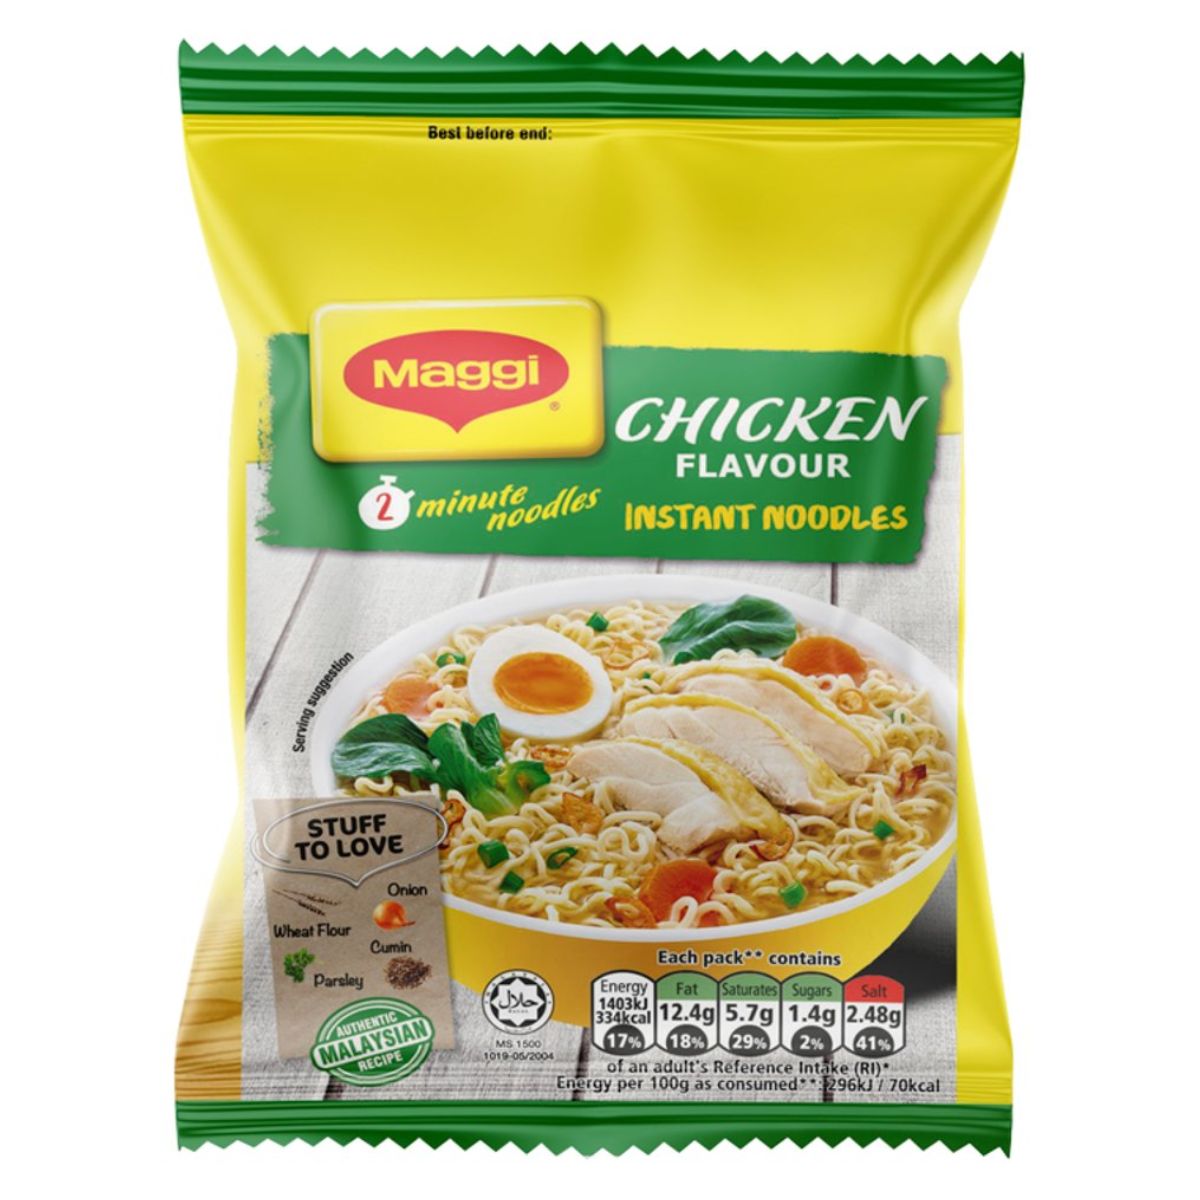 A packet of Maggi - 2 Minute Authentic Malaysian Chicken Flavour Noodles - 75g, showcasing a bowl of noodles with chicken slices, halved boiled egg, and greens on the front. The text highlights ingredients and nutritional information, perfect for those seeking quick and convenient meals with an authentic taste of Malaysia.